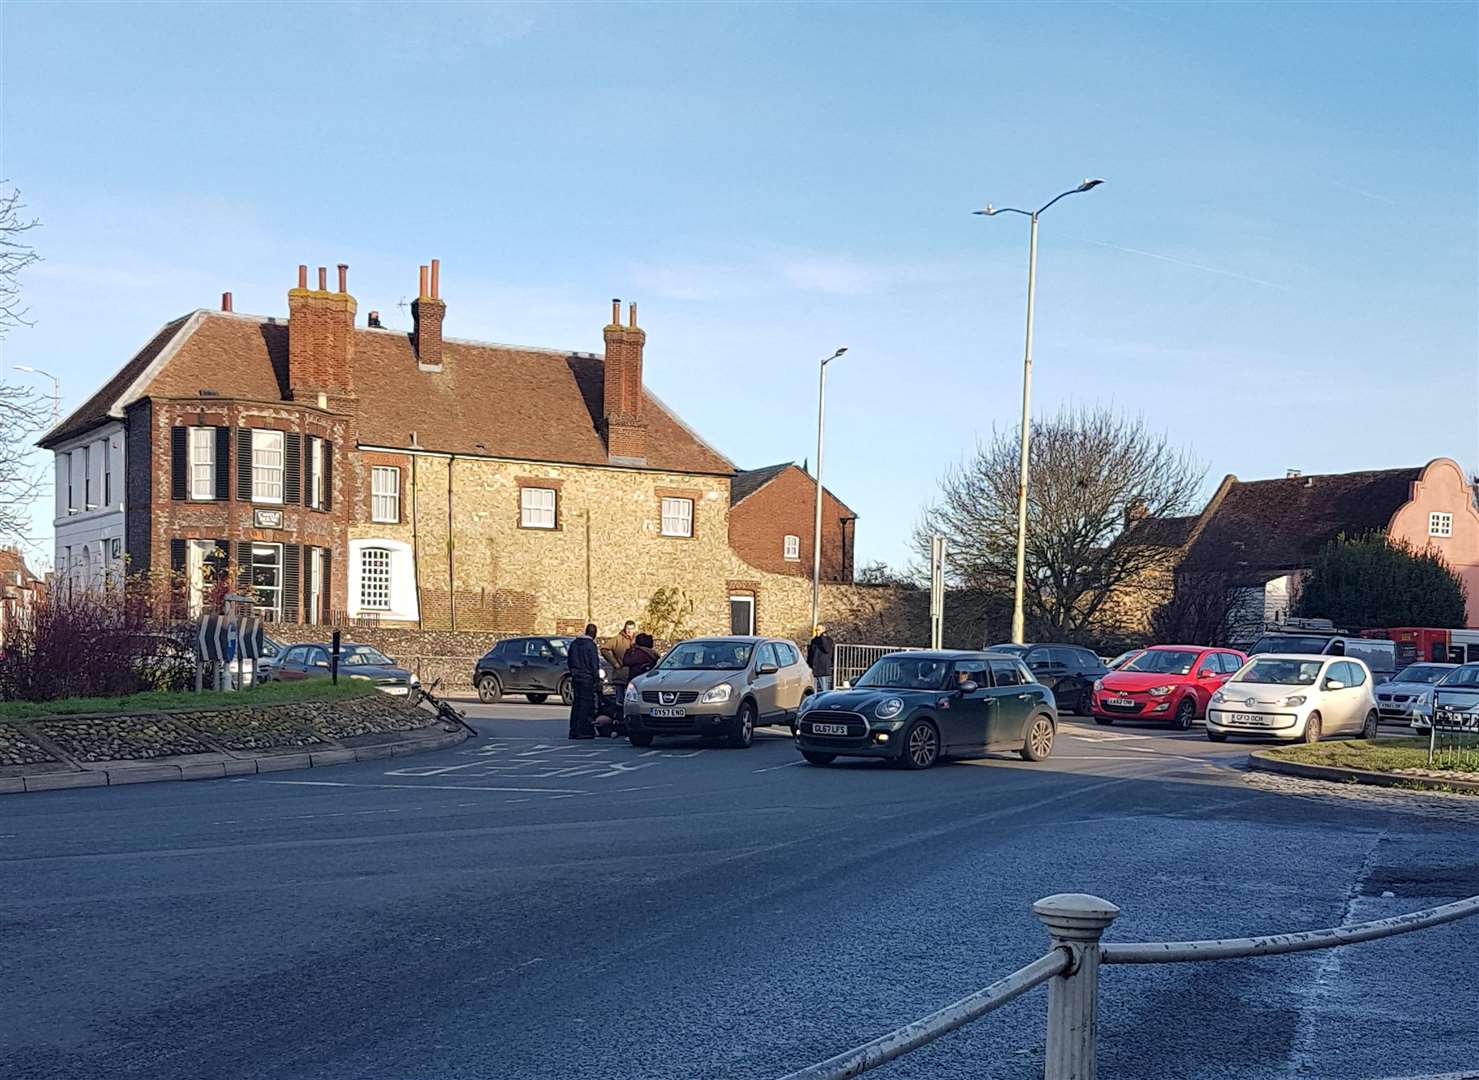 A cyclist was knocked over at the roundabout near Aldi in Canterbury (6204806)